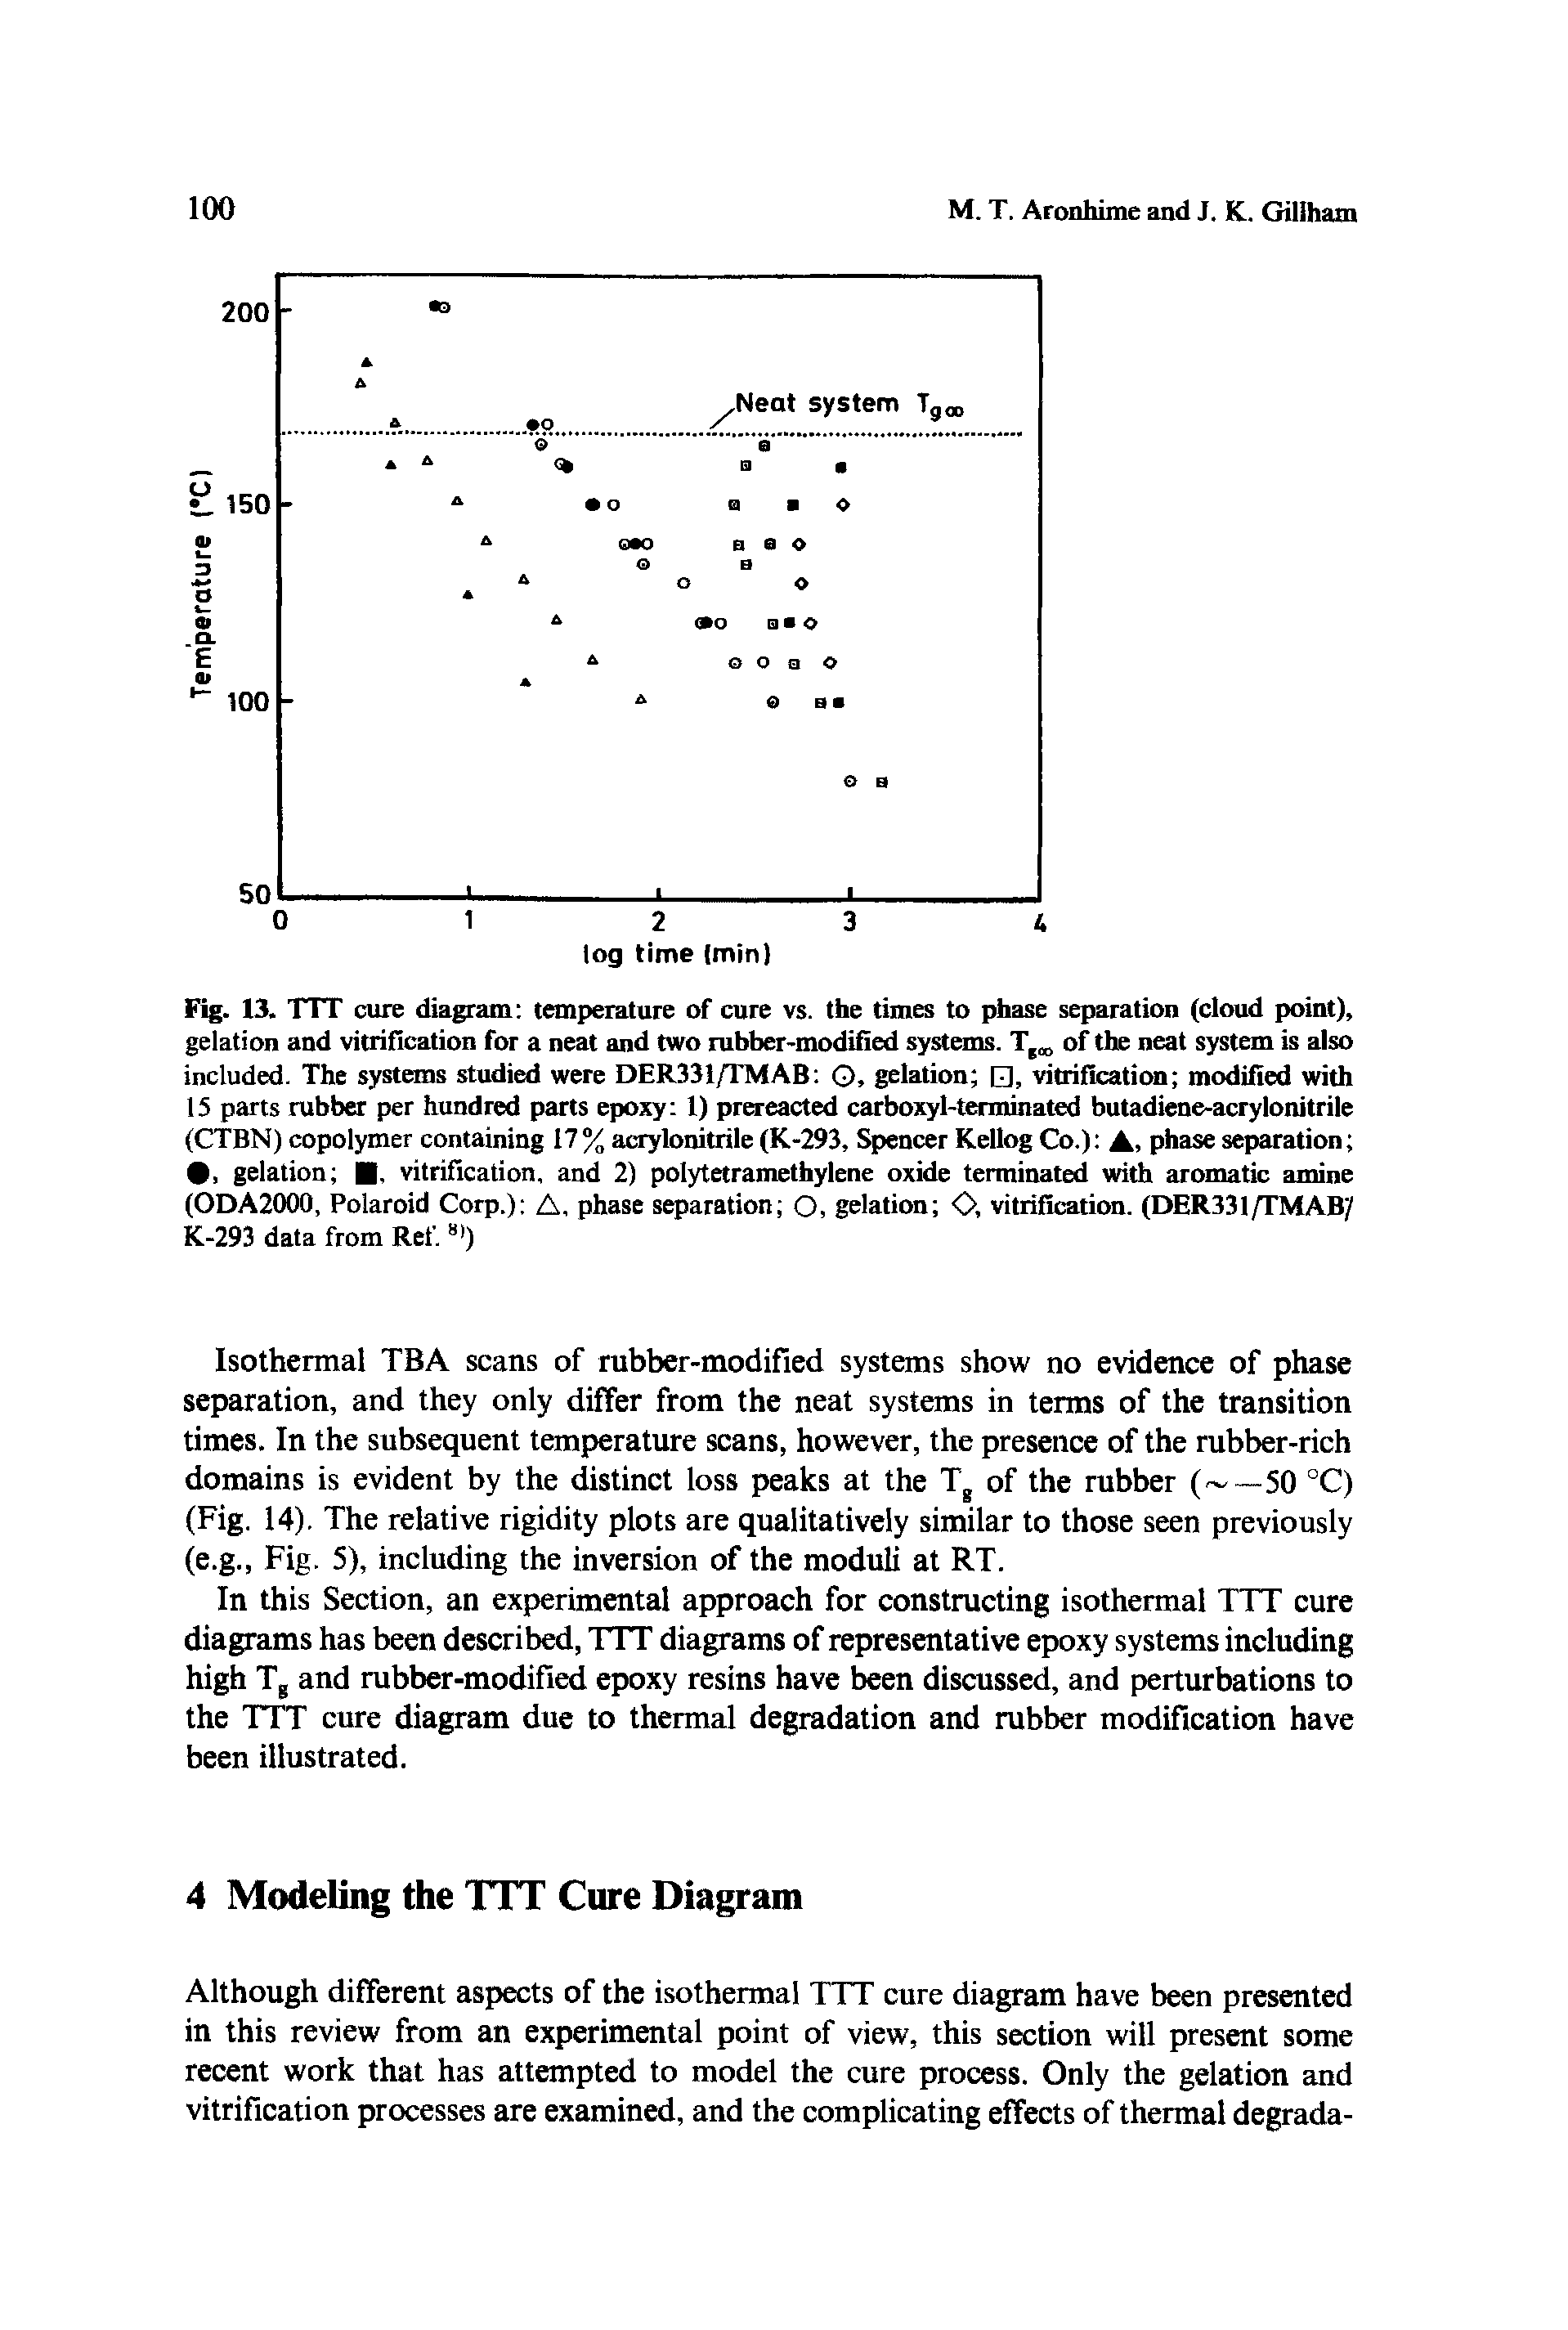 Fig. 13. TXT cure diagram temperature of cure vs. the times to phase separation (doud point), gelation and vitrification for a neat and two rubber-modified systems. of the neat system is also included. The systems studied were DER331/TMAB O, gelation , vitrificaticm modified with IS parts rubber per hundred parts epoxy 1) pr eacted carboxyl-terminated butadiene-acrylonitrile (CTBN) copolymer containing 17% acrylonitrile (K-293, Spencer Kellog Co.) A, phase separation , gelation , vitrification, and 2) polytetramethylene oxide terminated with anmiatic amine (ODA2000, Polaroid Corp.) A. phase separation O, gelation O, vitrification. (DER331/TMAB/ K-293 data from Ref. )...